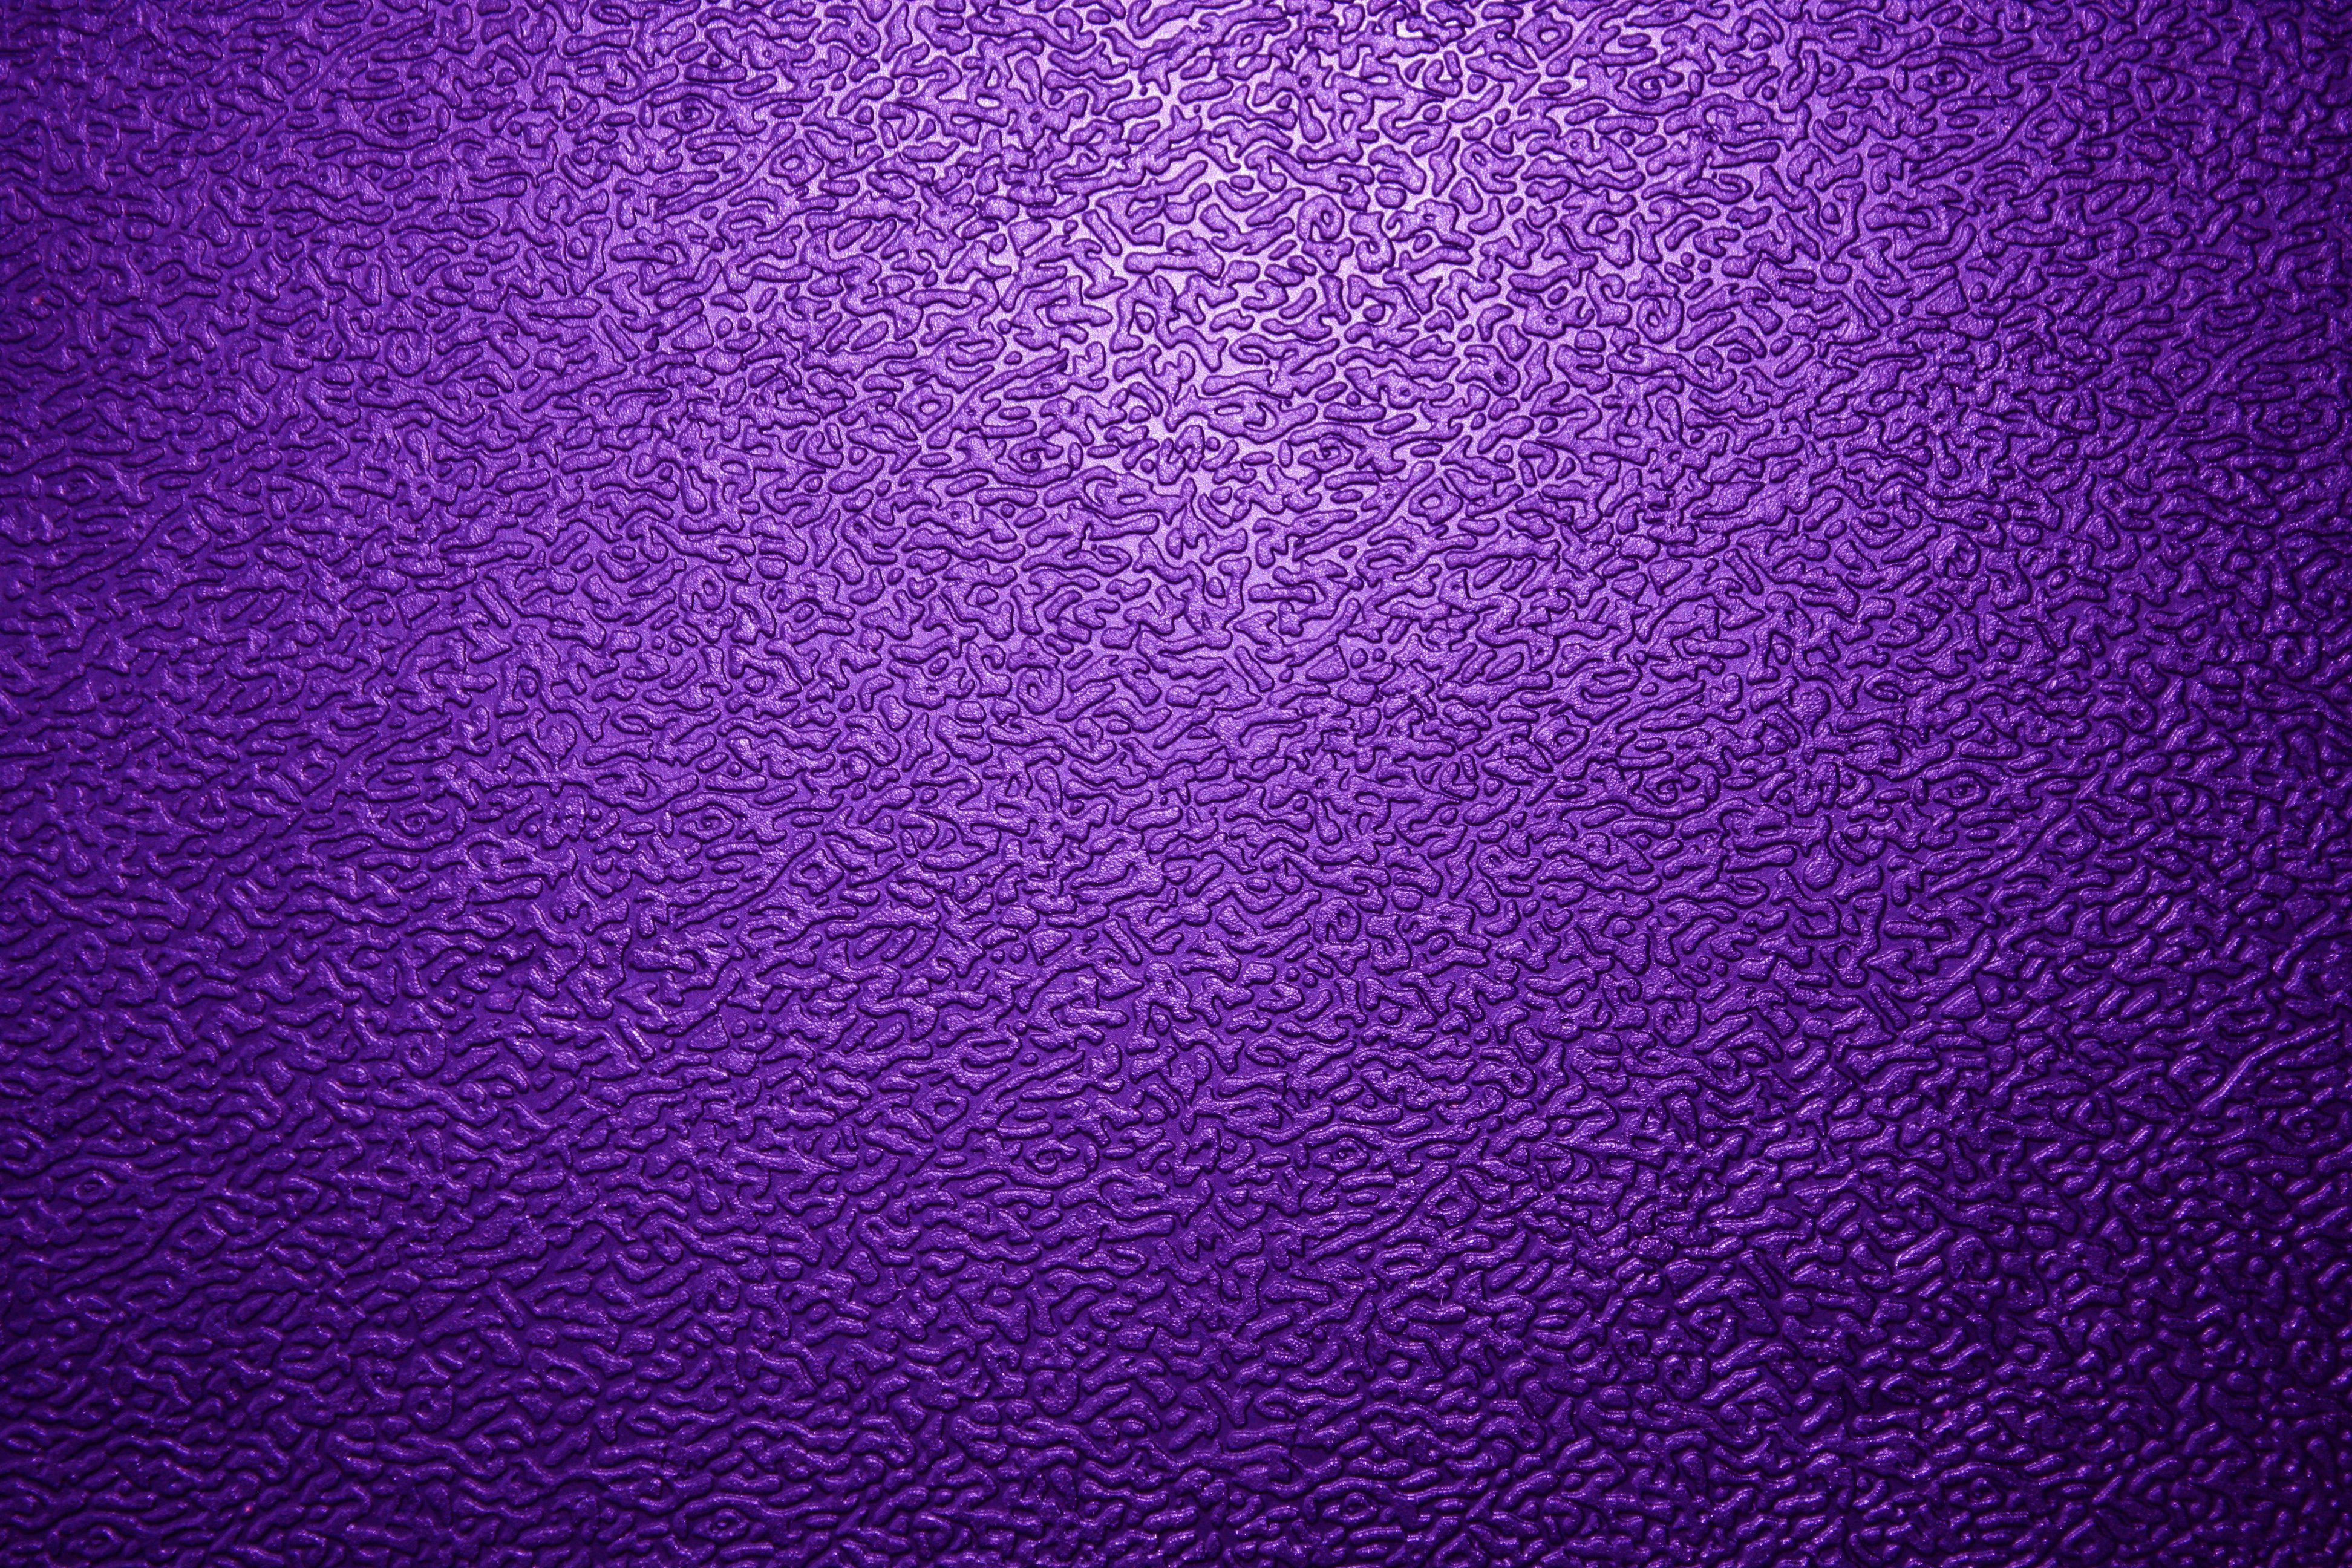 Textured Purple Plastic Close Up Picture Free Photograph